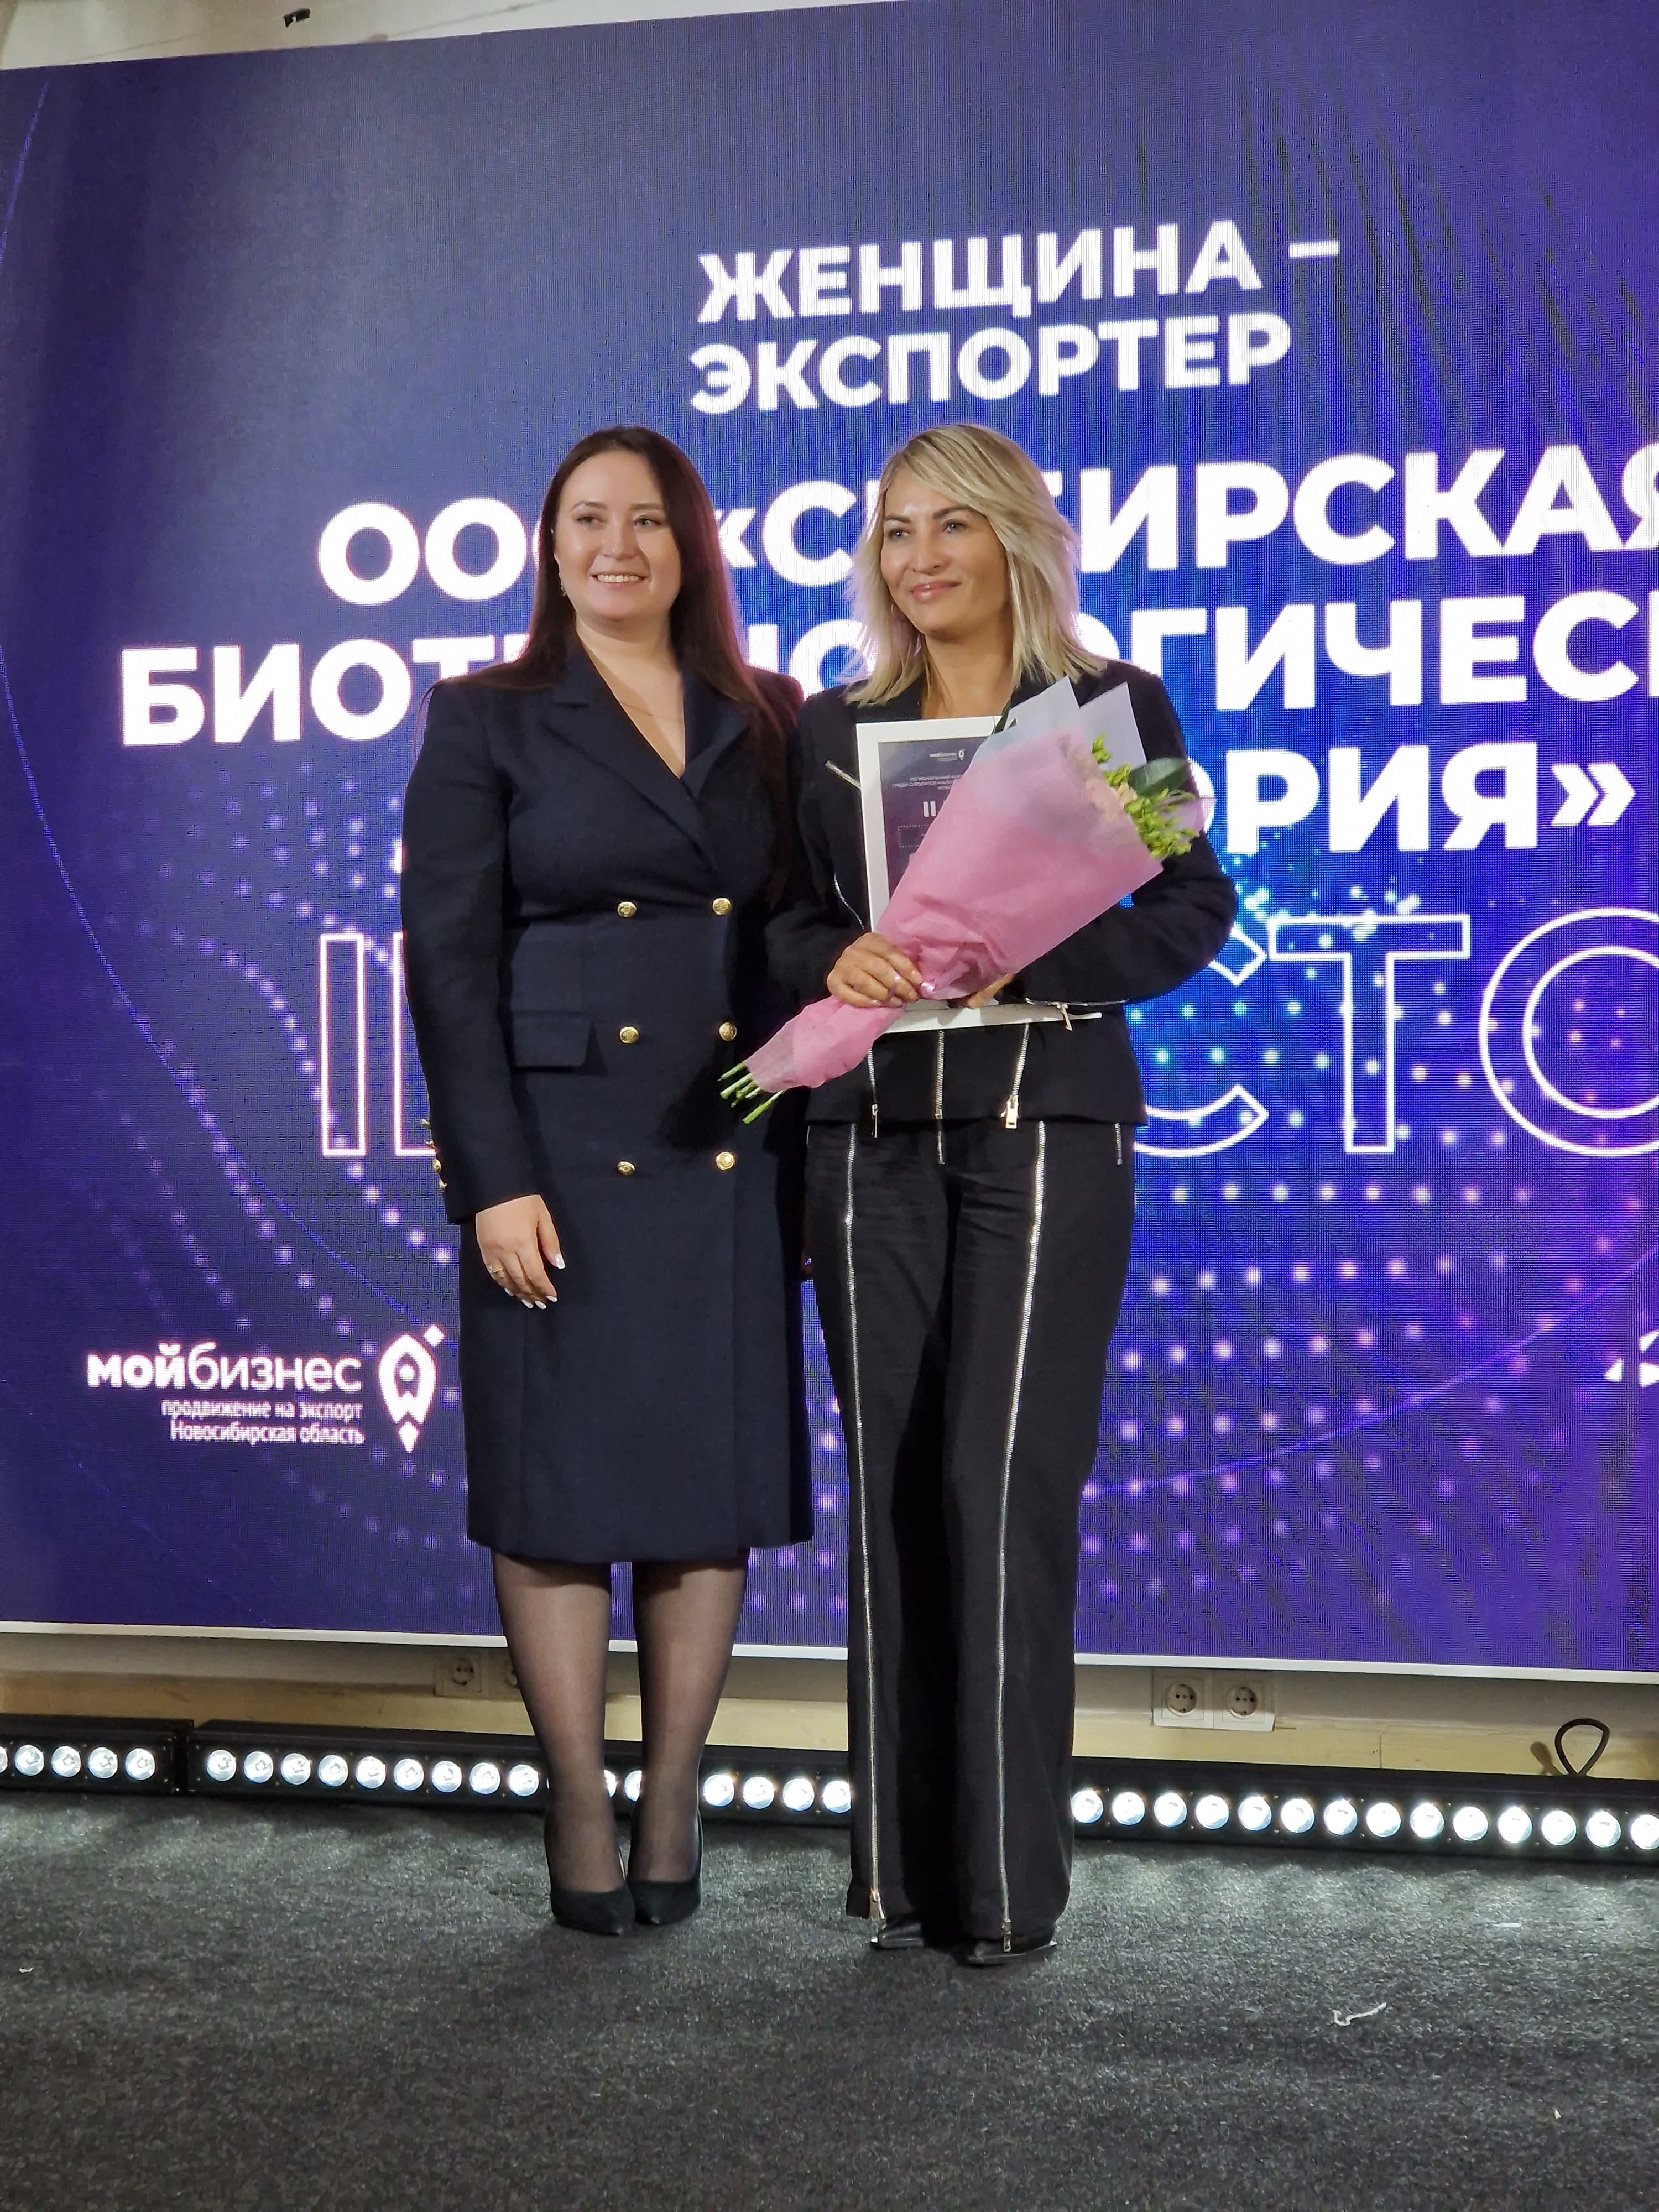 Biotime company won in 3 categories of the All-Russian competition «Exporter of the Year»